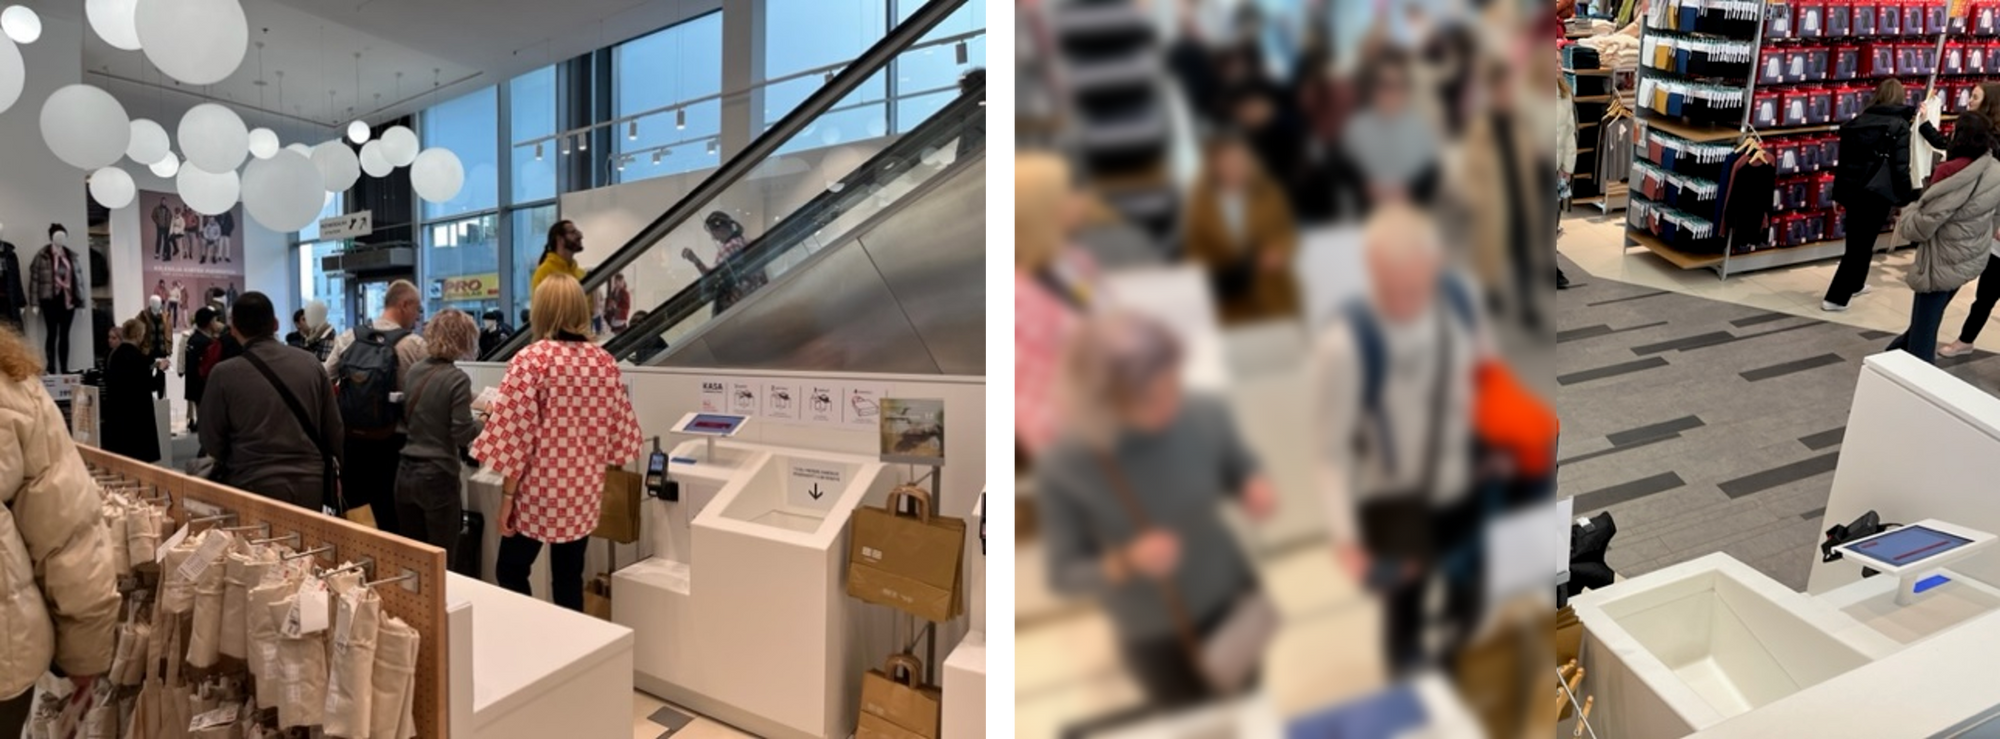 People shopping at the self service checkouts in Uniqlo